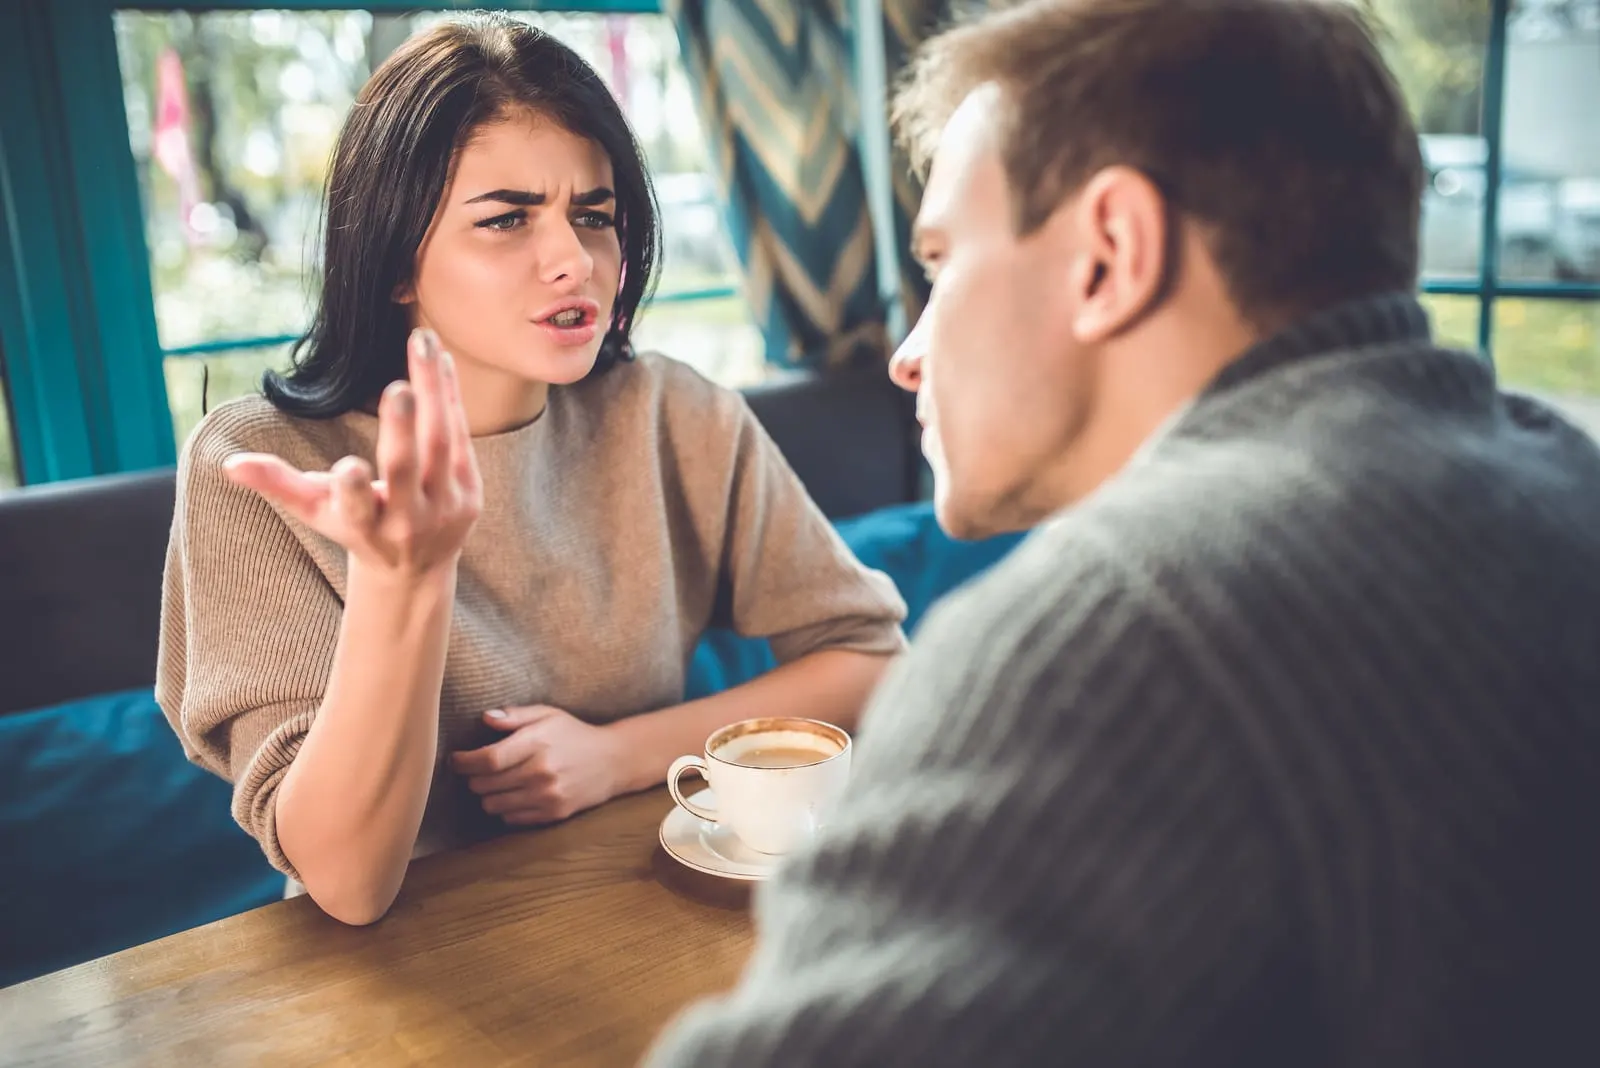 a man and a woman are arguing in a cafe